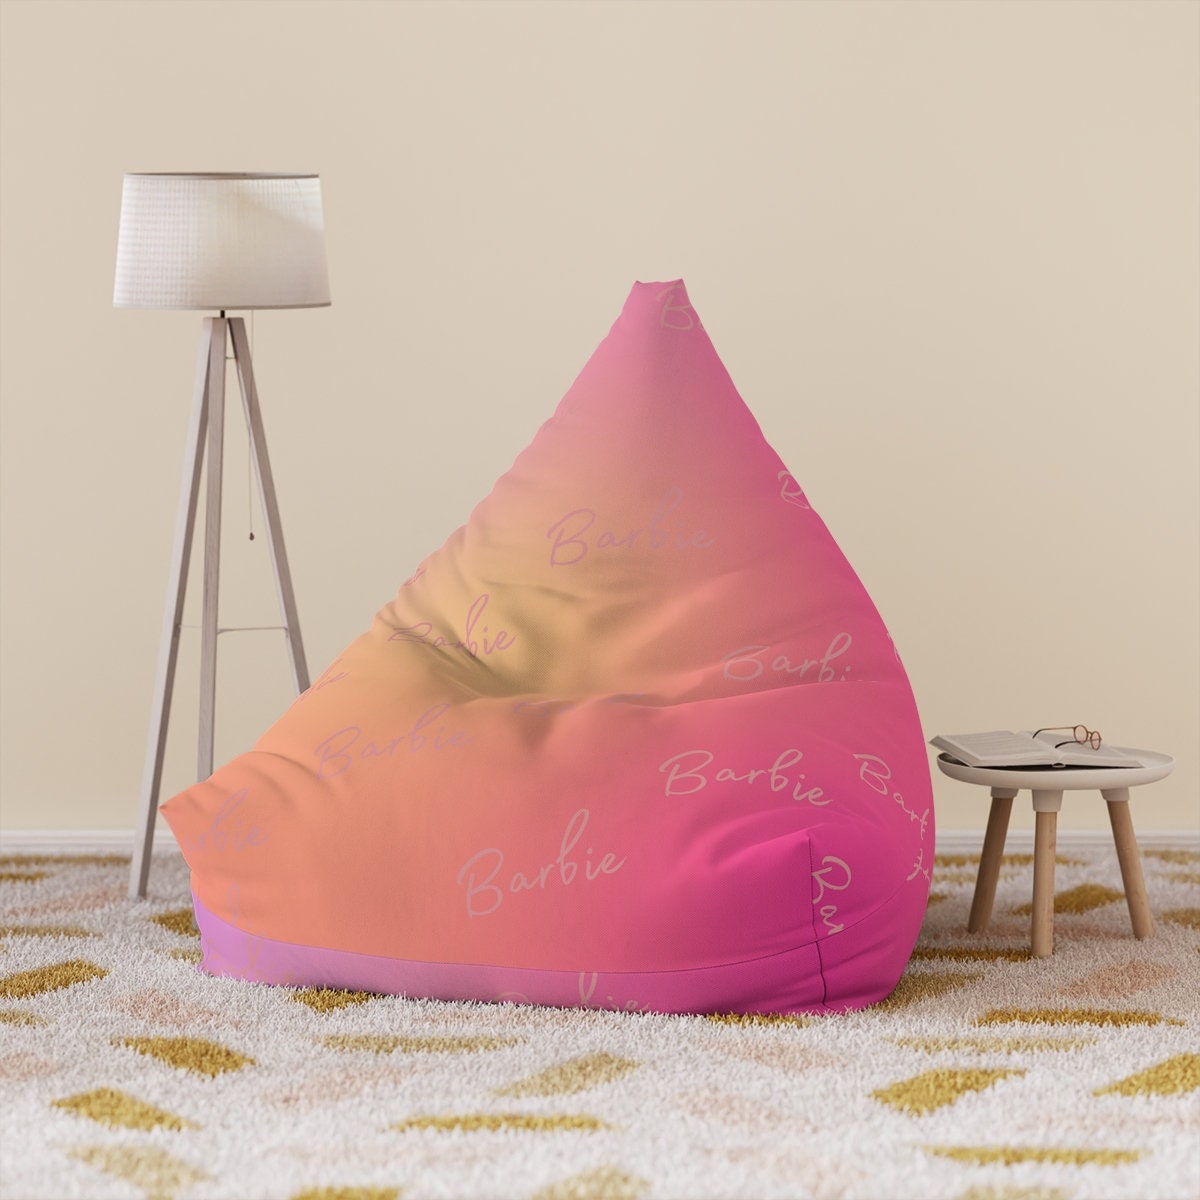 Did you know that PU or rexine bean bags are plastic based and is really  bad for you and the environment. PVC material is known carcinogenic and is  very... | By Urban